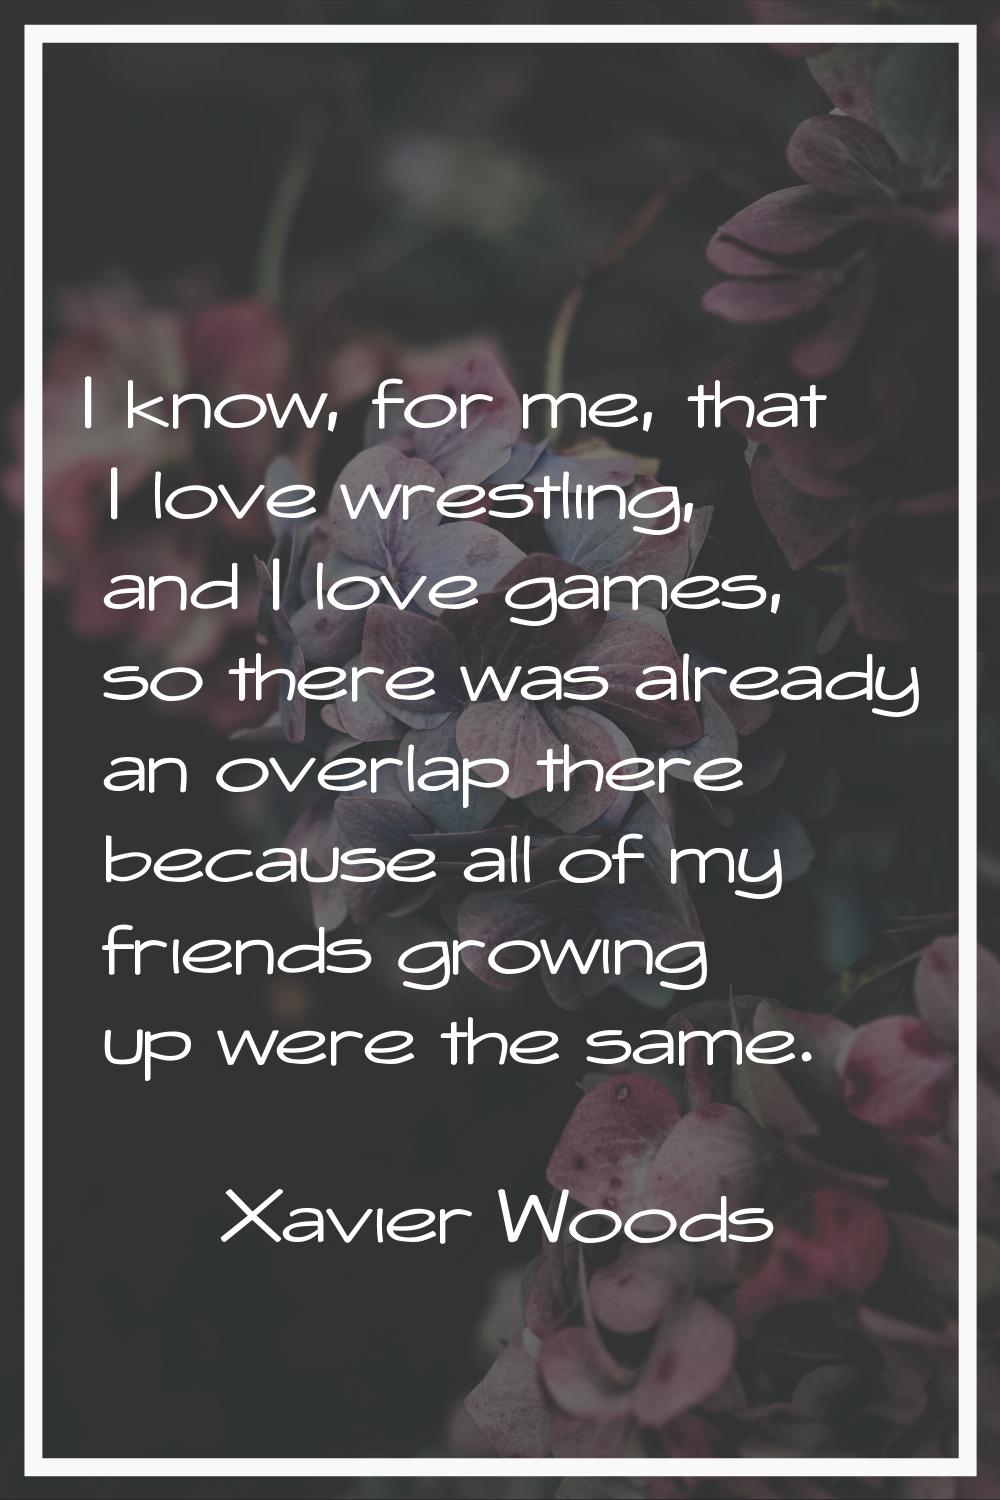 I know, for me, that I love wrestling, and I love games, so there was already an overlap there beca